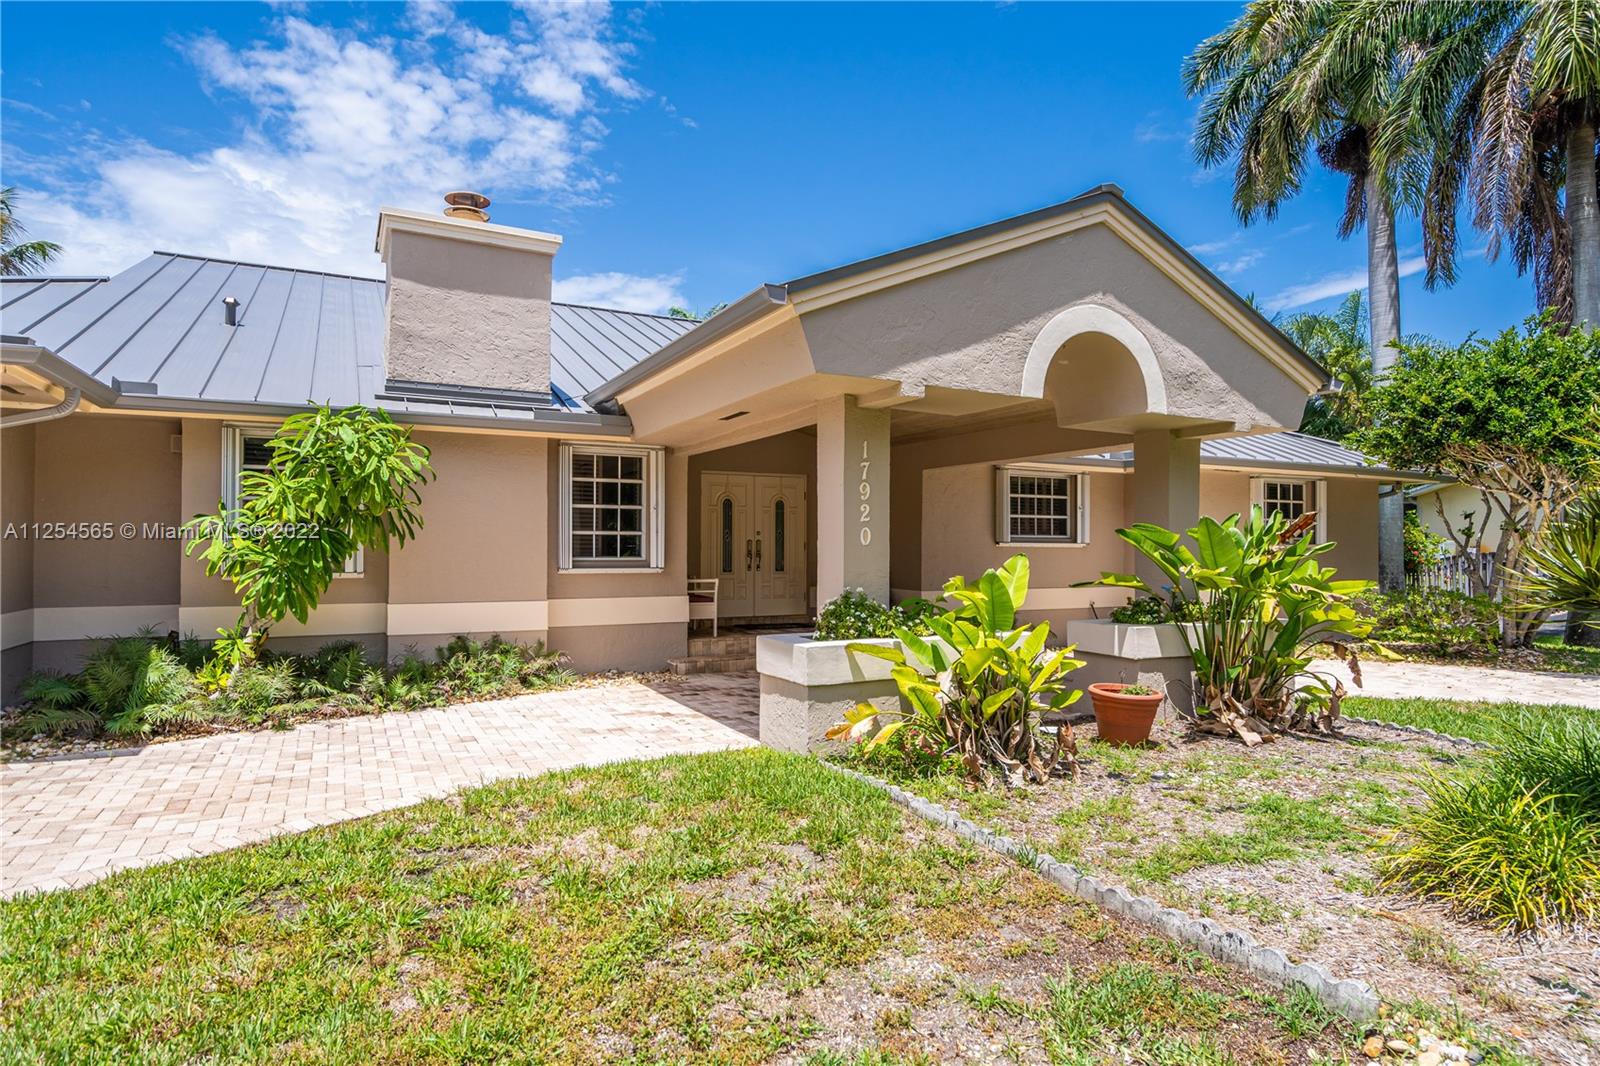 This Family home is situated on a large lot (14,994 Sq.Ft.) surrounded by natural foliage and fruit trees. Located in one of the sought-after areas of Palmetto Bay. This spacious 4br/3bath house was built in 1988 home features high impact widows, metal roof which was installed in 2021, 2 central a/c new, stainless steel appliances, taverntine pool deck, new compositedeck and the outdoor swimming pool with a screened-in enclosure make this the perfect home for a growing family. Come home today! Won't last long.near Coral Reef Public Park, a 2-minute ride to Coral Reef Elementary Schools as well as a walking distance to A+ rated Southwood Middle School. The quality of Schools and superb location is unmatched.